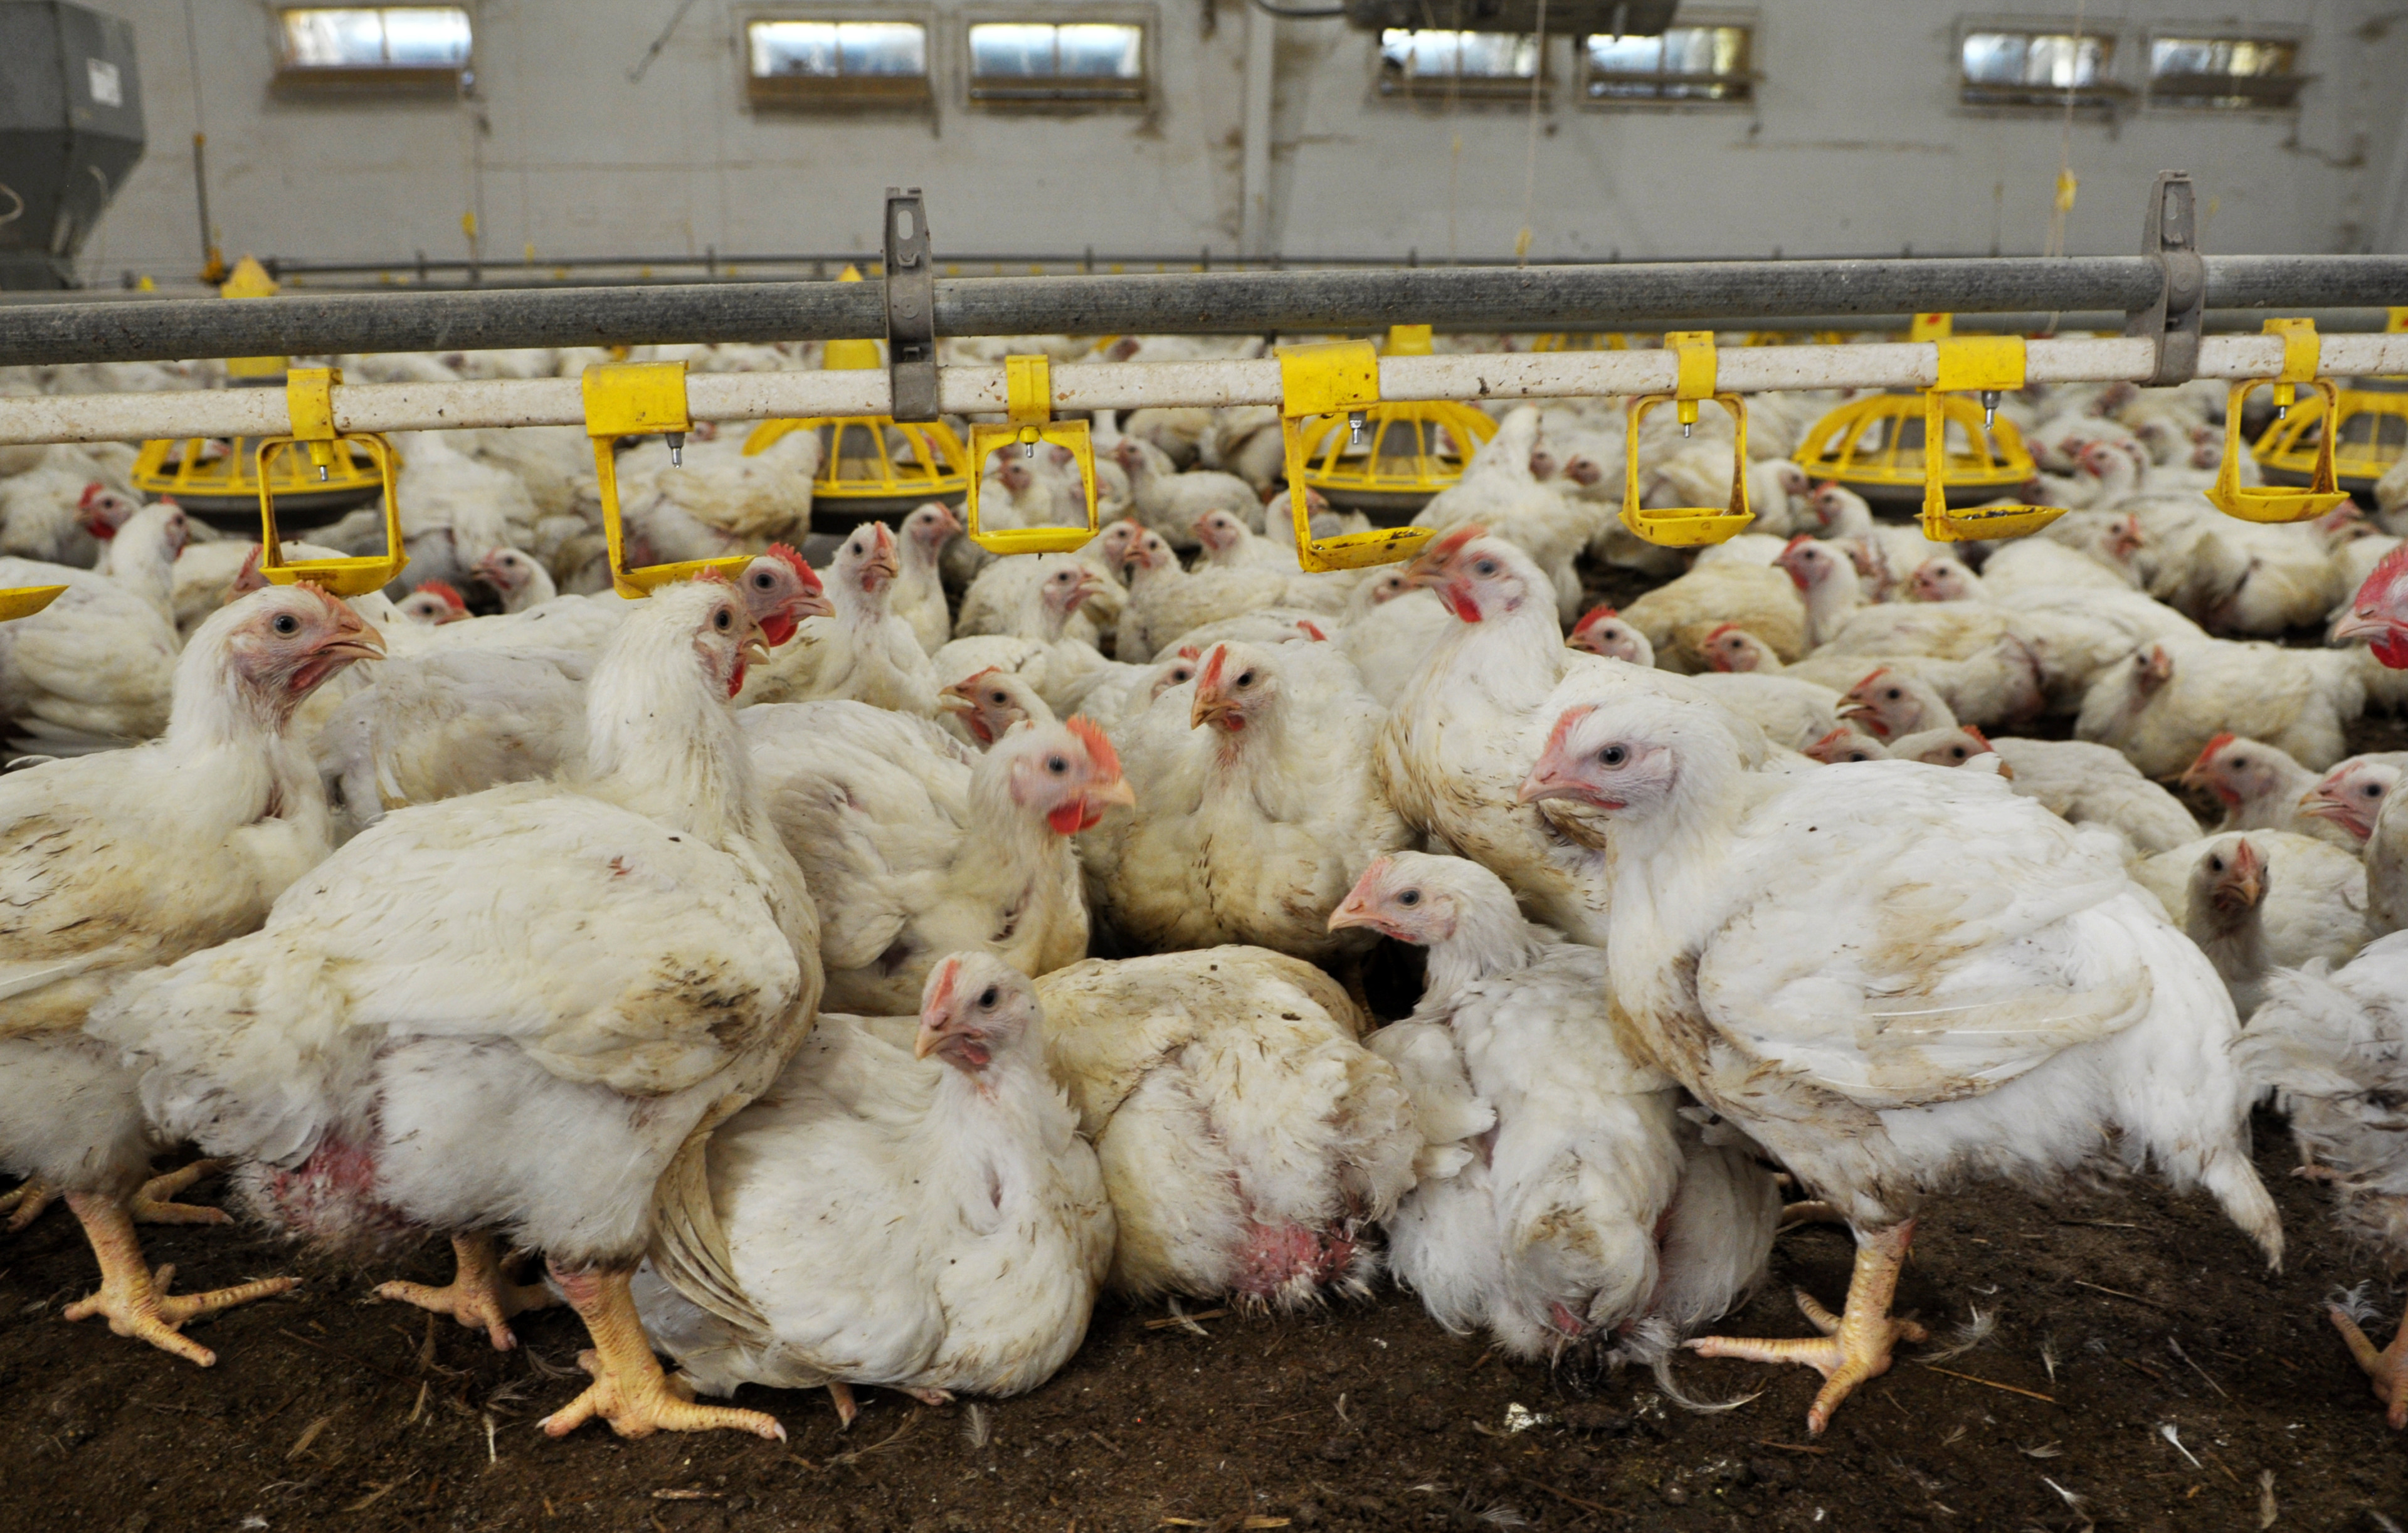 Factory Chickens What Is Life Like for Chickens in Factory Farms? picture